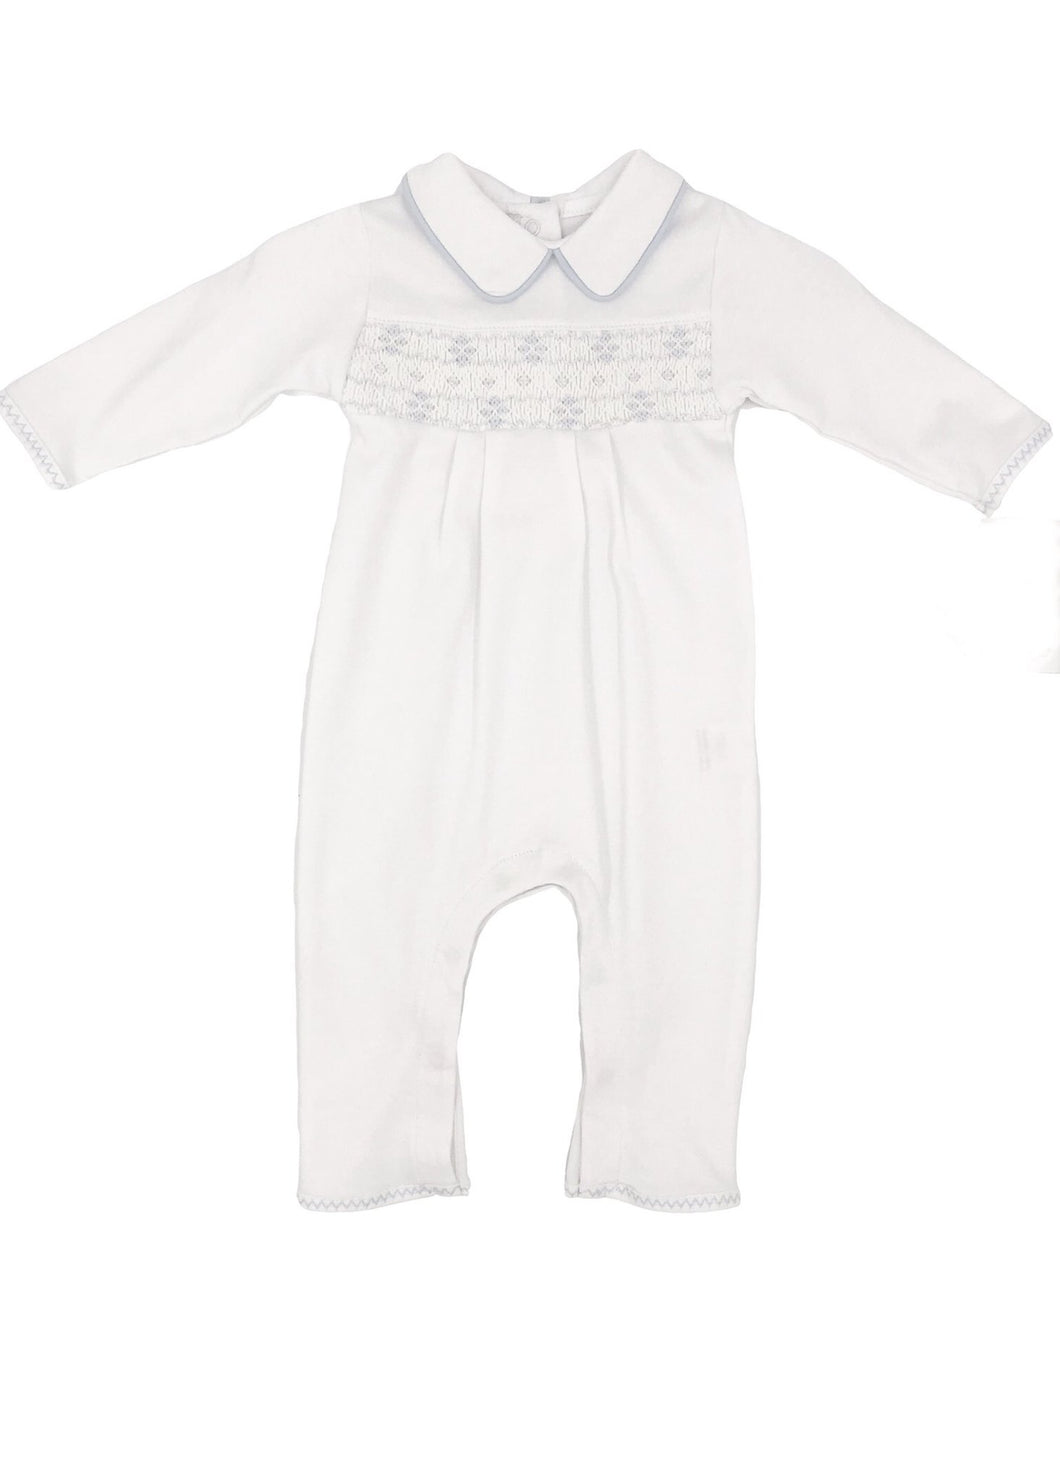 Lia & Luca's Classic Smocked Collared Blue Footie